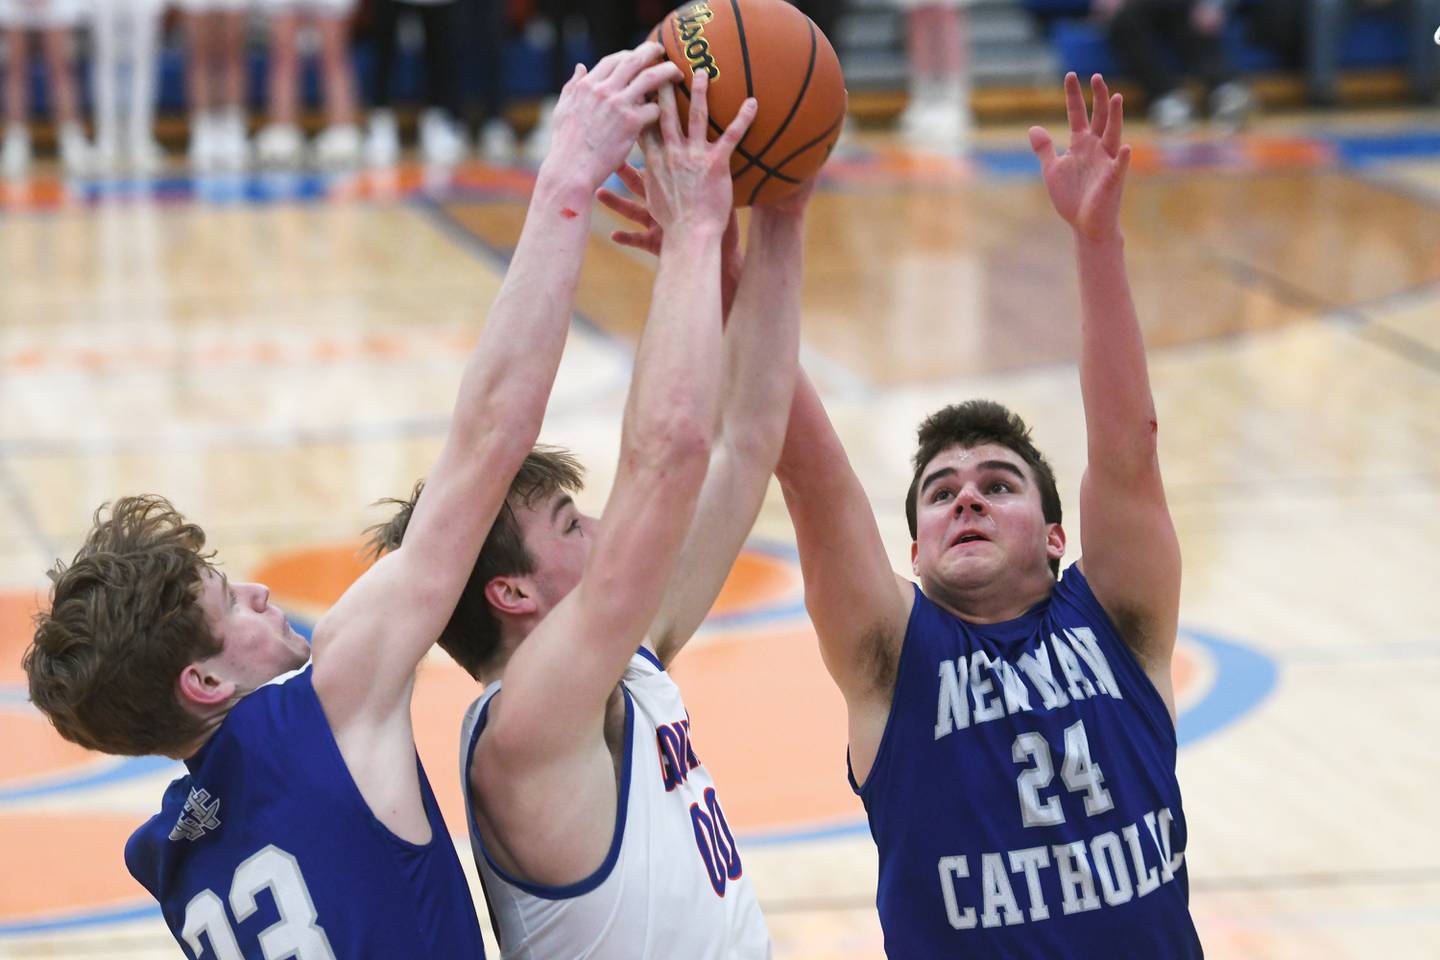 Eastland's Kellen Henze (center) battles and Newman's Lucas Simpson (left) and Ethan Van Lunduit for a rebound during semi-final action at the 1A Eastland Regional.